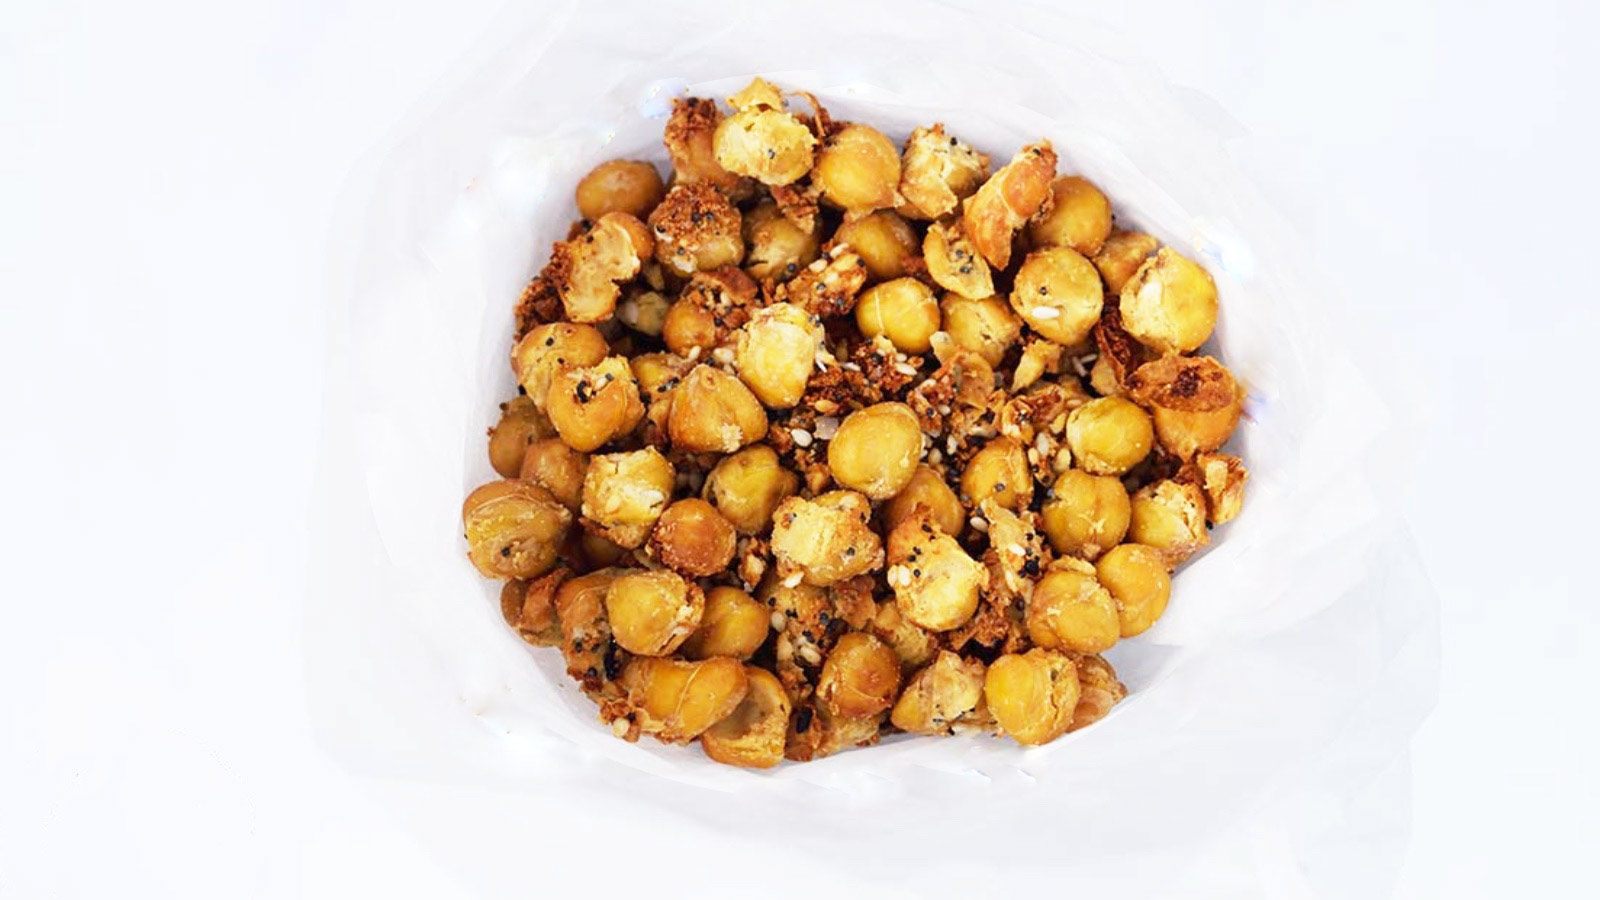 <p>Who needs unhealthy snacks and chips when you can have these delicious <a href="https://www.thegraciouspantry.com/roasted-everything-bagel-chickpeas-recipe/">air fryer everything bagel chickpeas</a>? They’re perfect for an on-the-go snack or for serving at your next movie night with the family. They’re savory and addicting, and you can even use them as a topping on your next salad—if you don’t eat them all first, that is.</p>